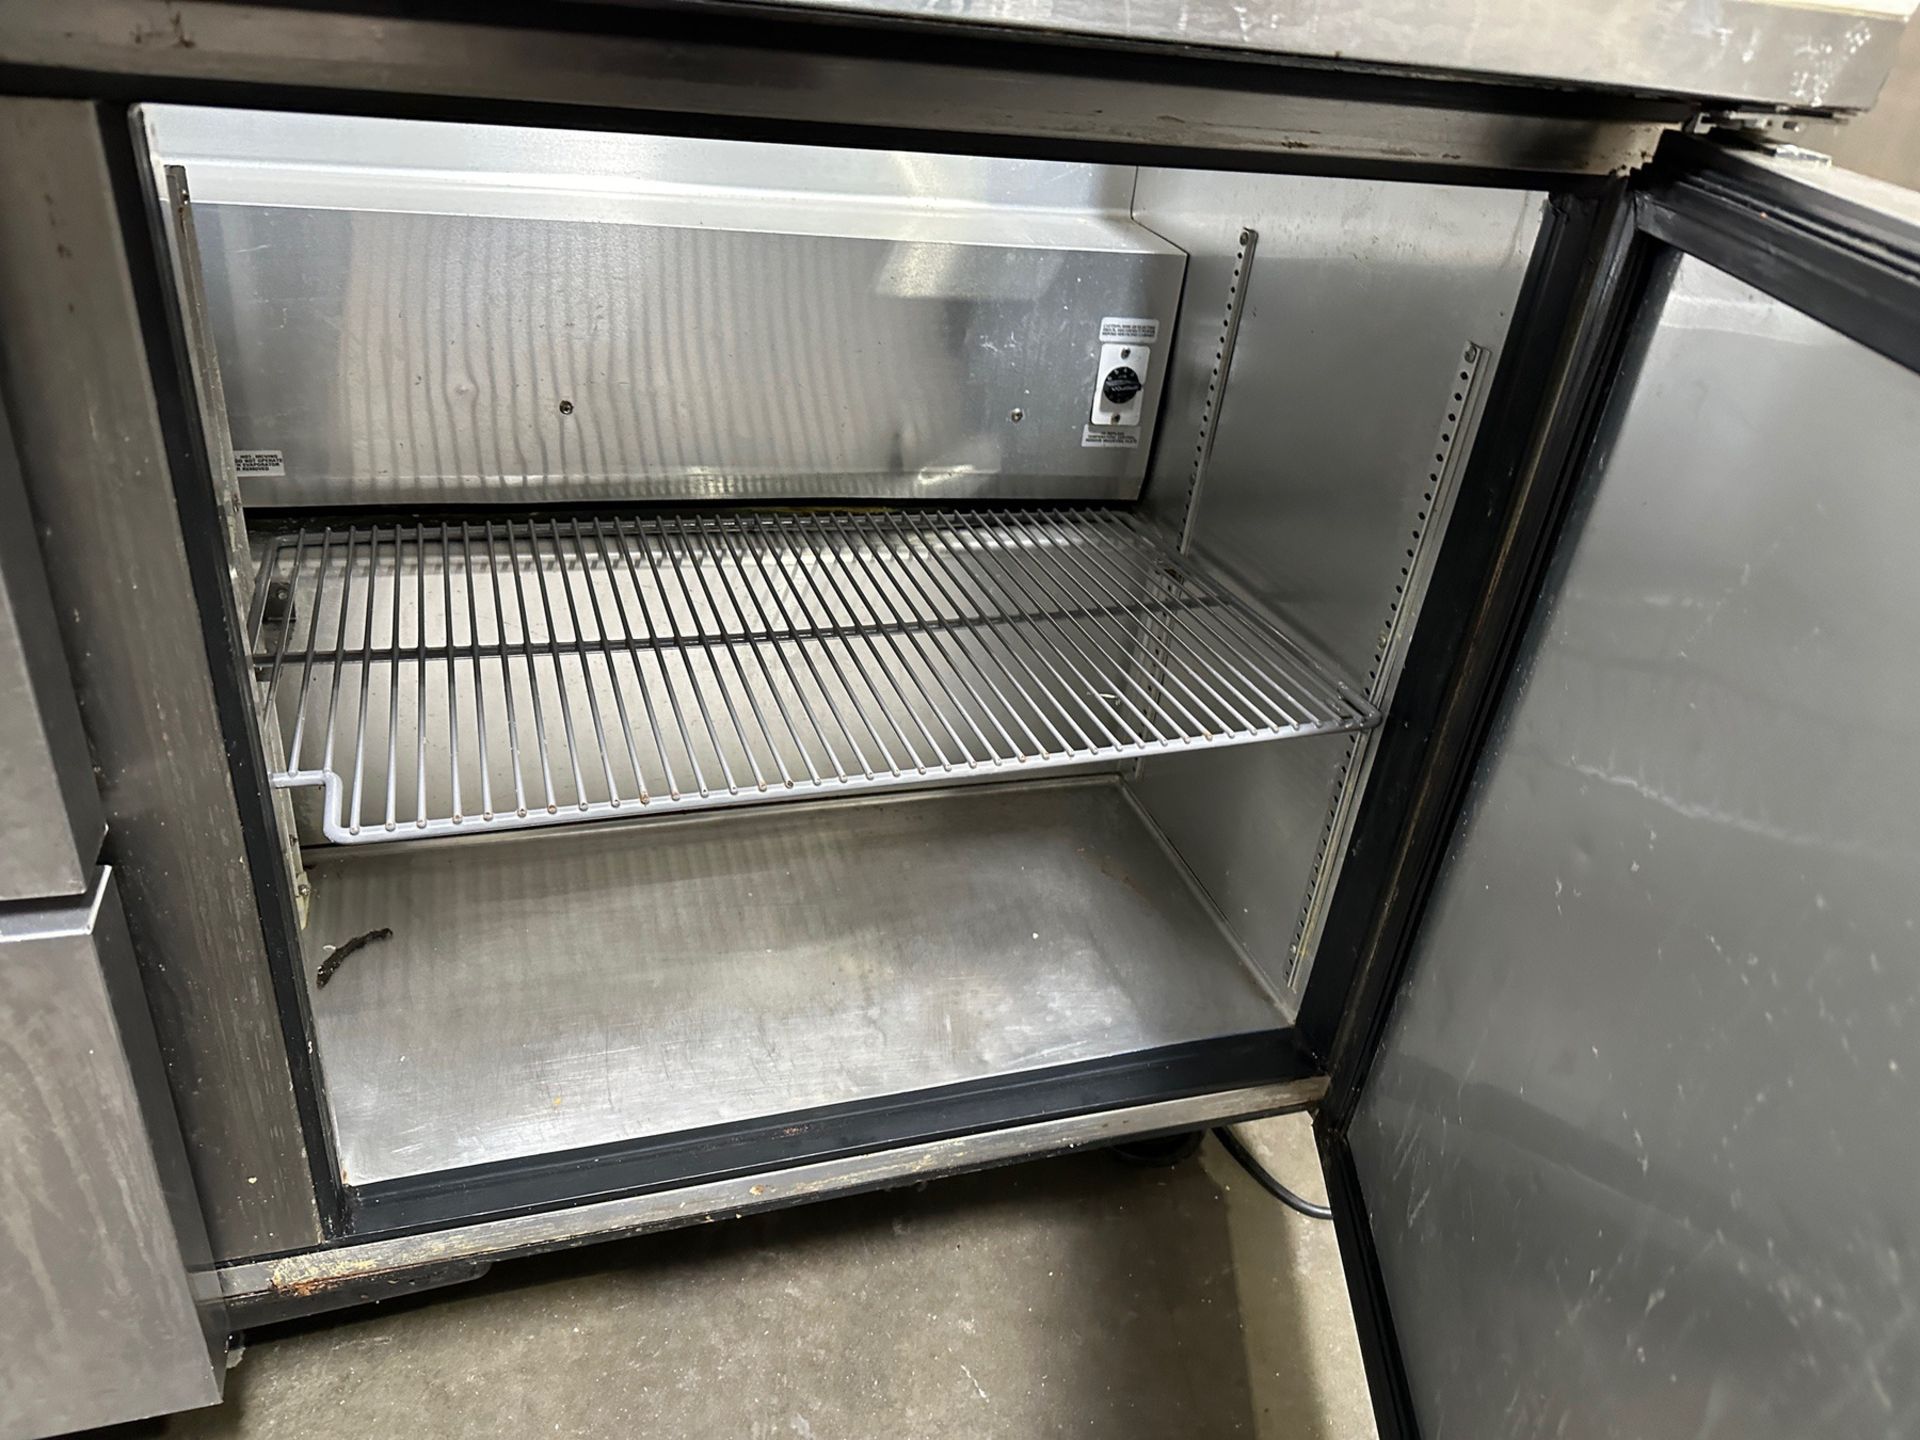 True Refrigeration Stainless Steel Refrigerated Prep Station | Rig Fee $100 - Image 5 of 6